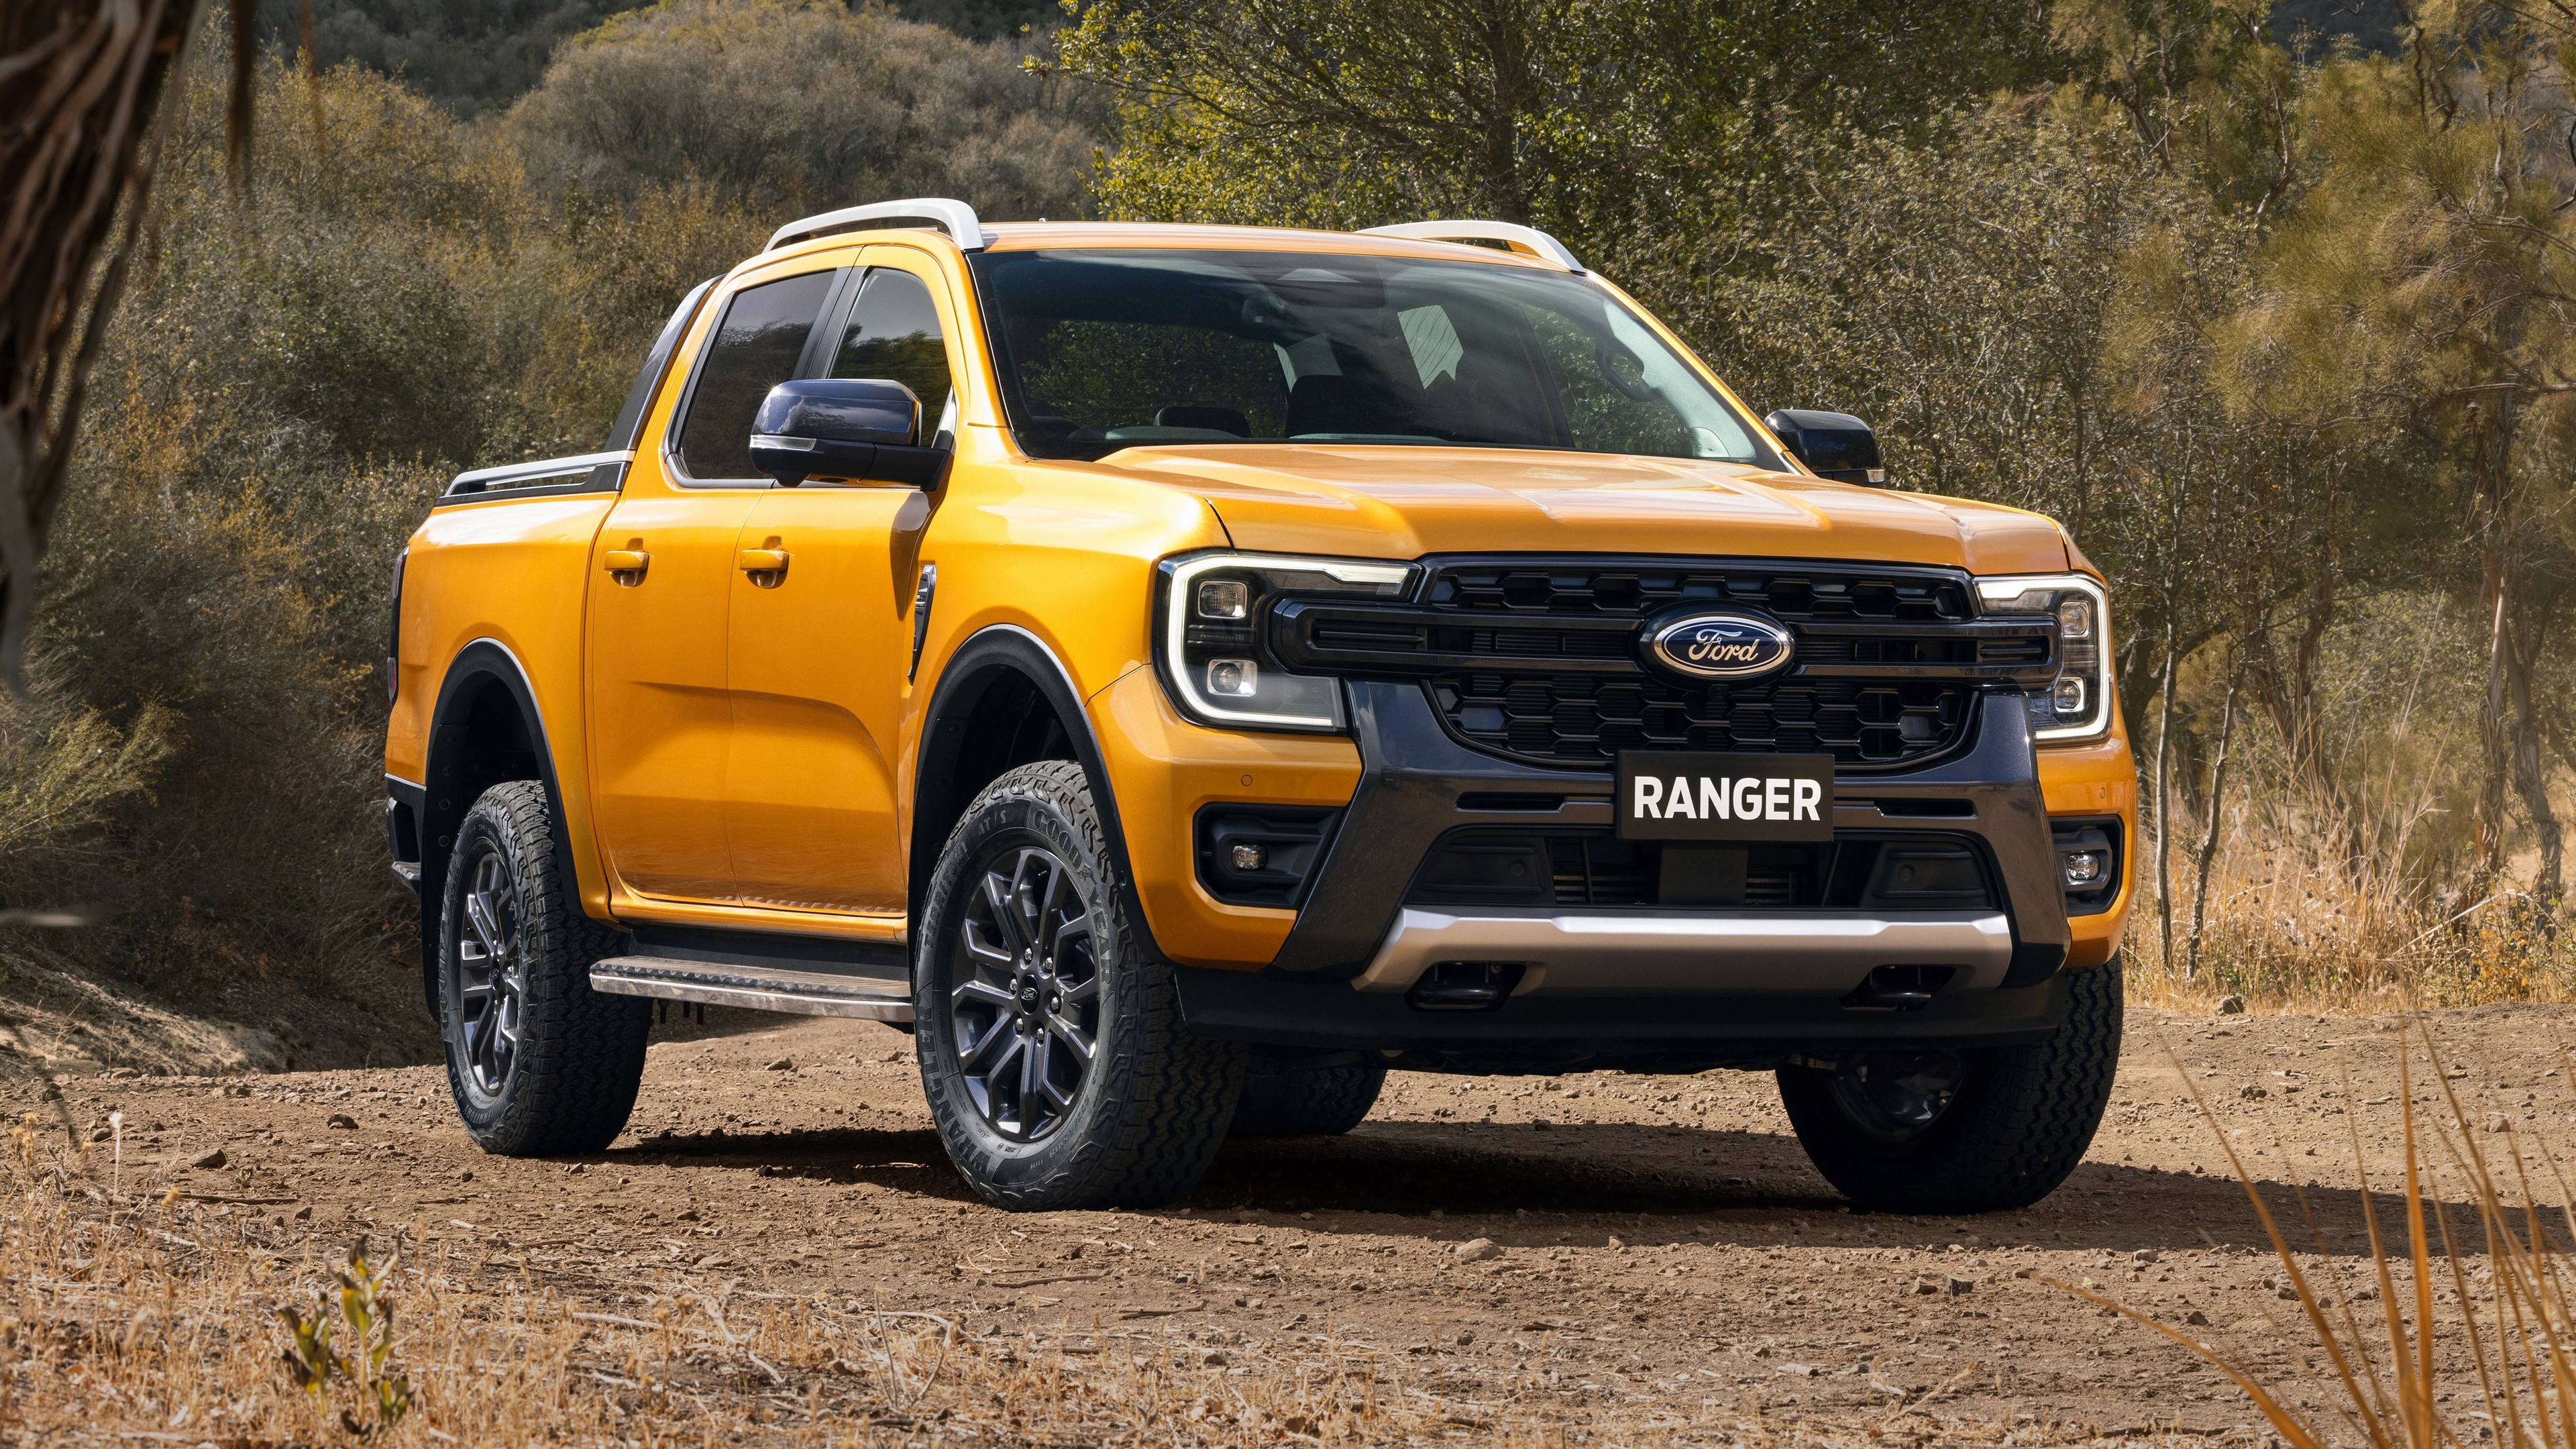 Ford Ford Ranger Car Yellow Cars Offroad Pickup Trucks American Cars Vehicle 3840x2160